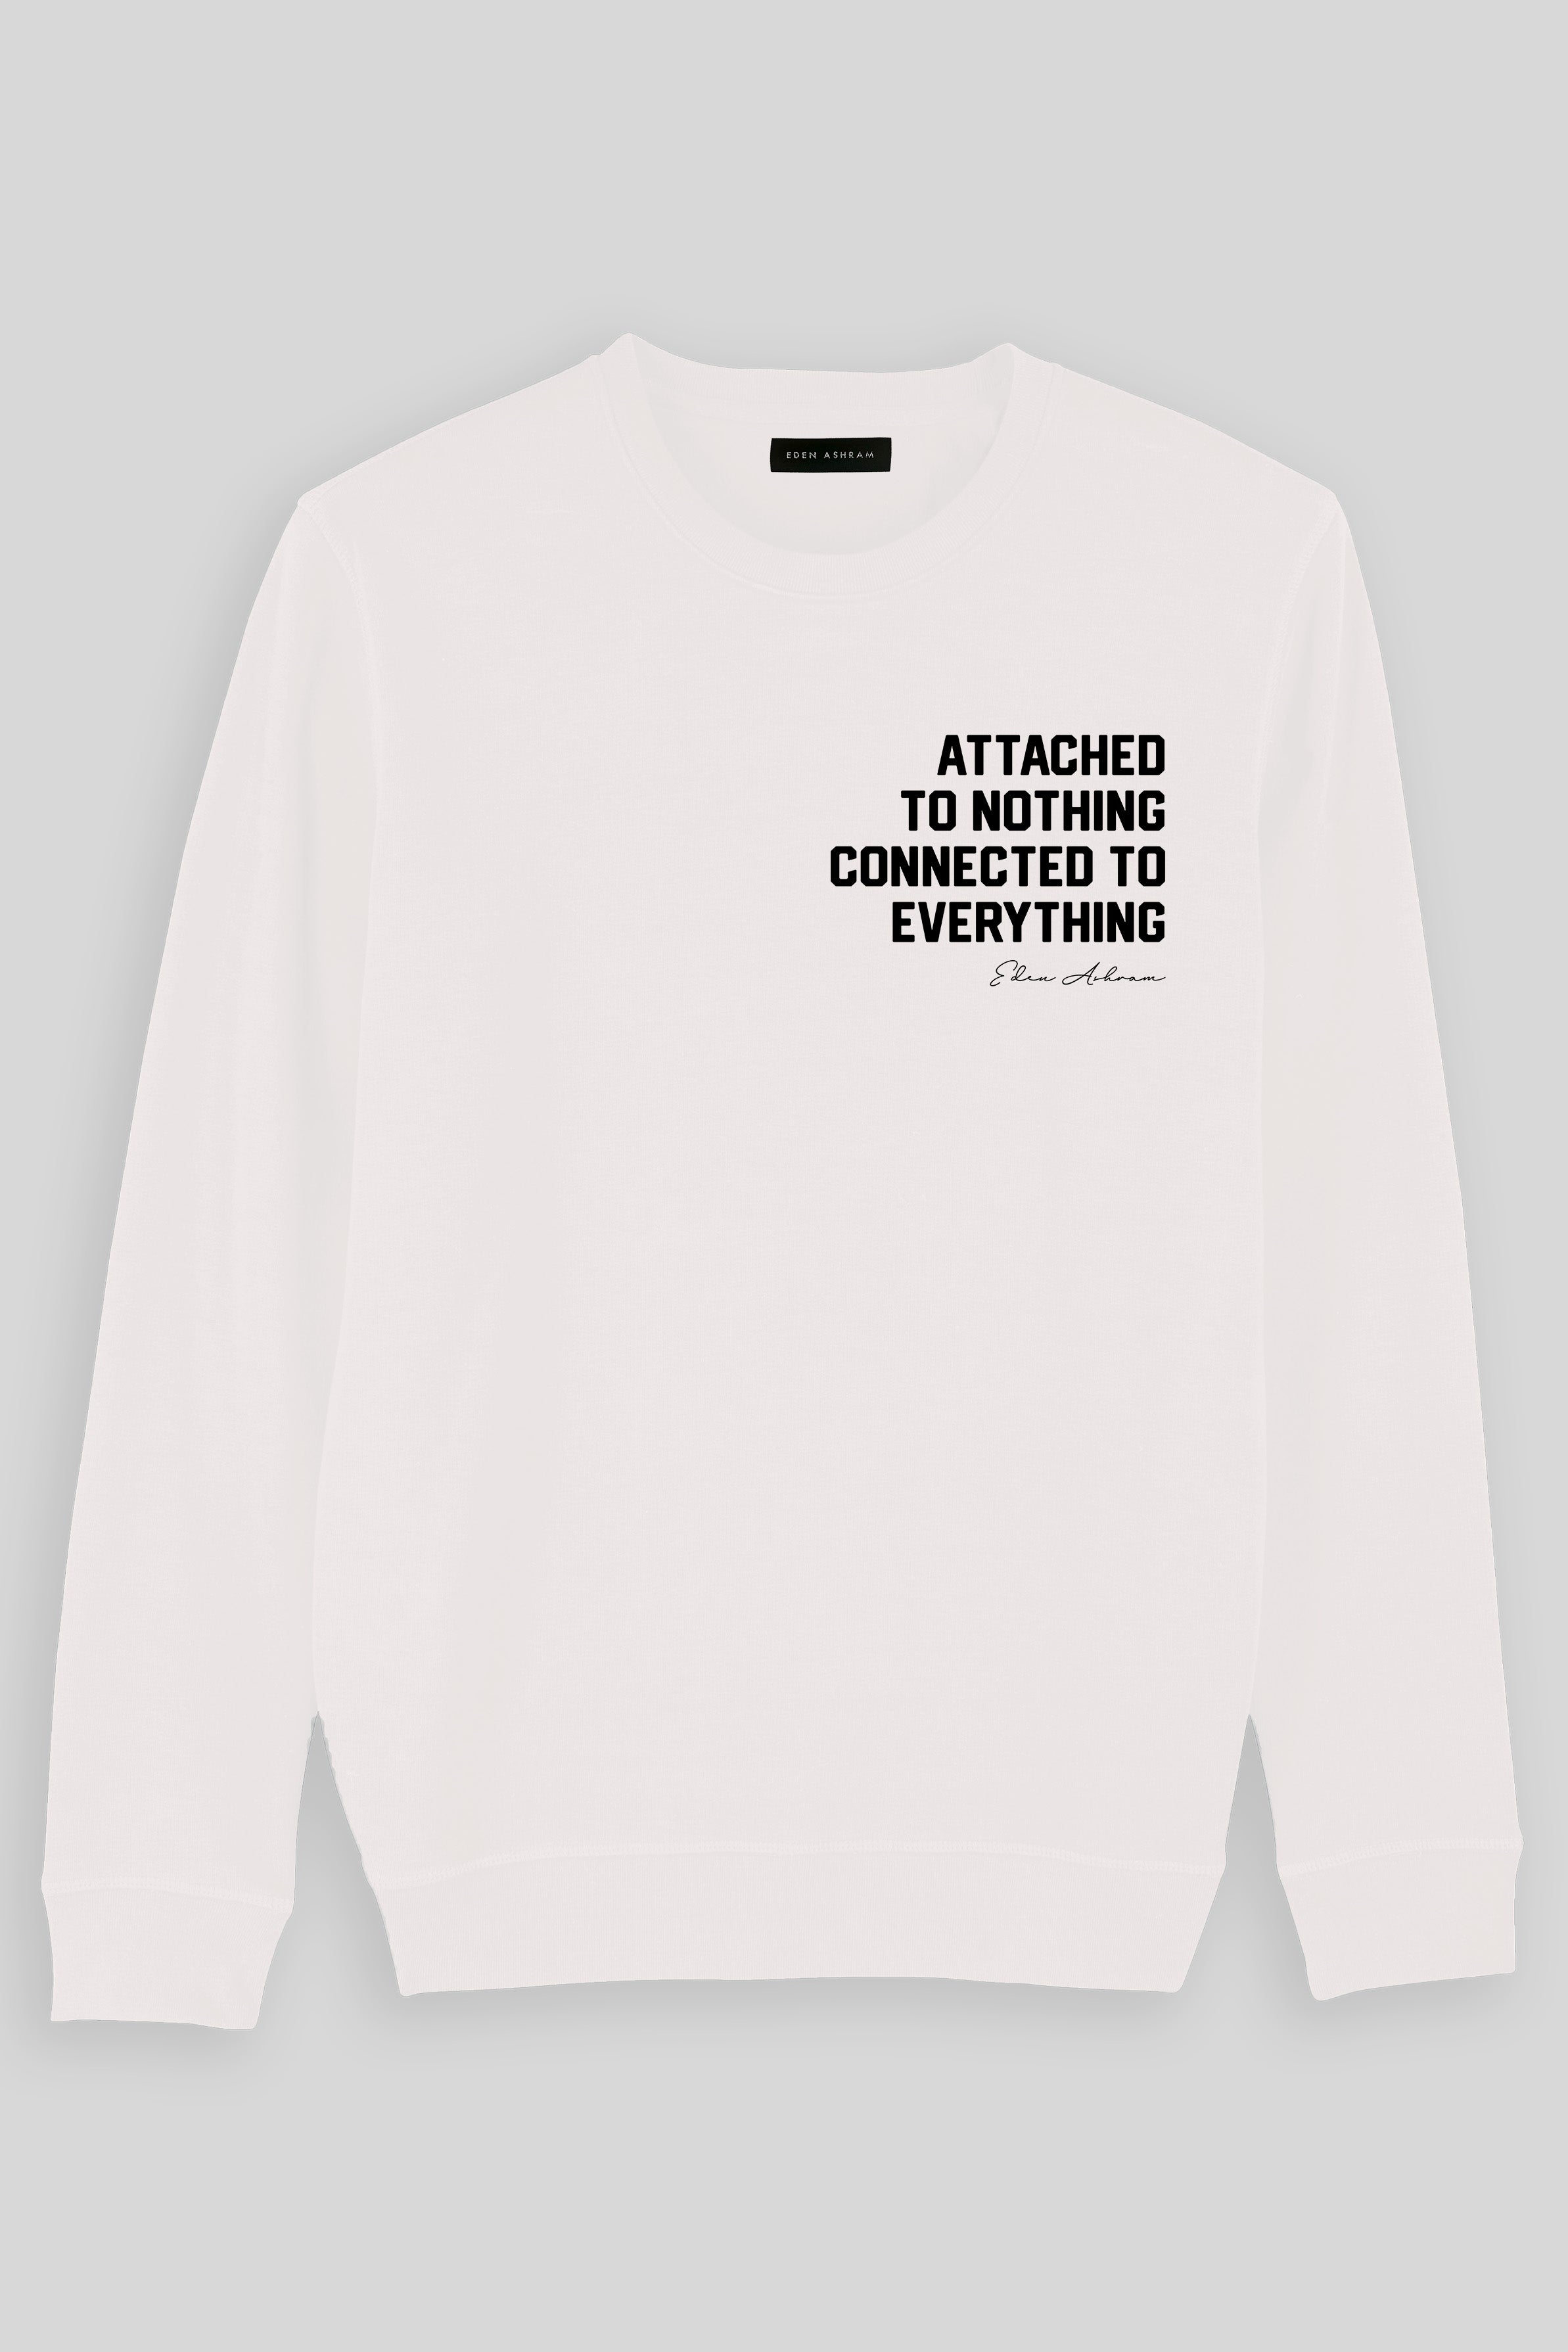 Attached To Nothing Connected To Everything Premium Crew Neck Sweatshirt